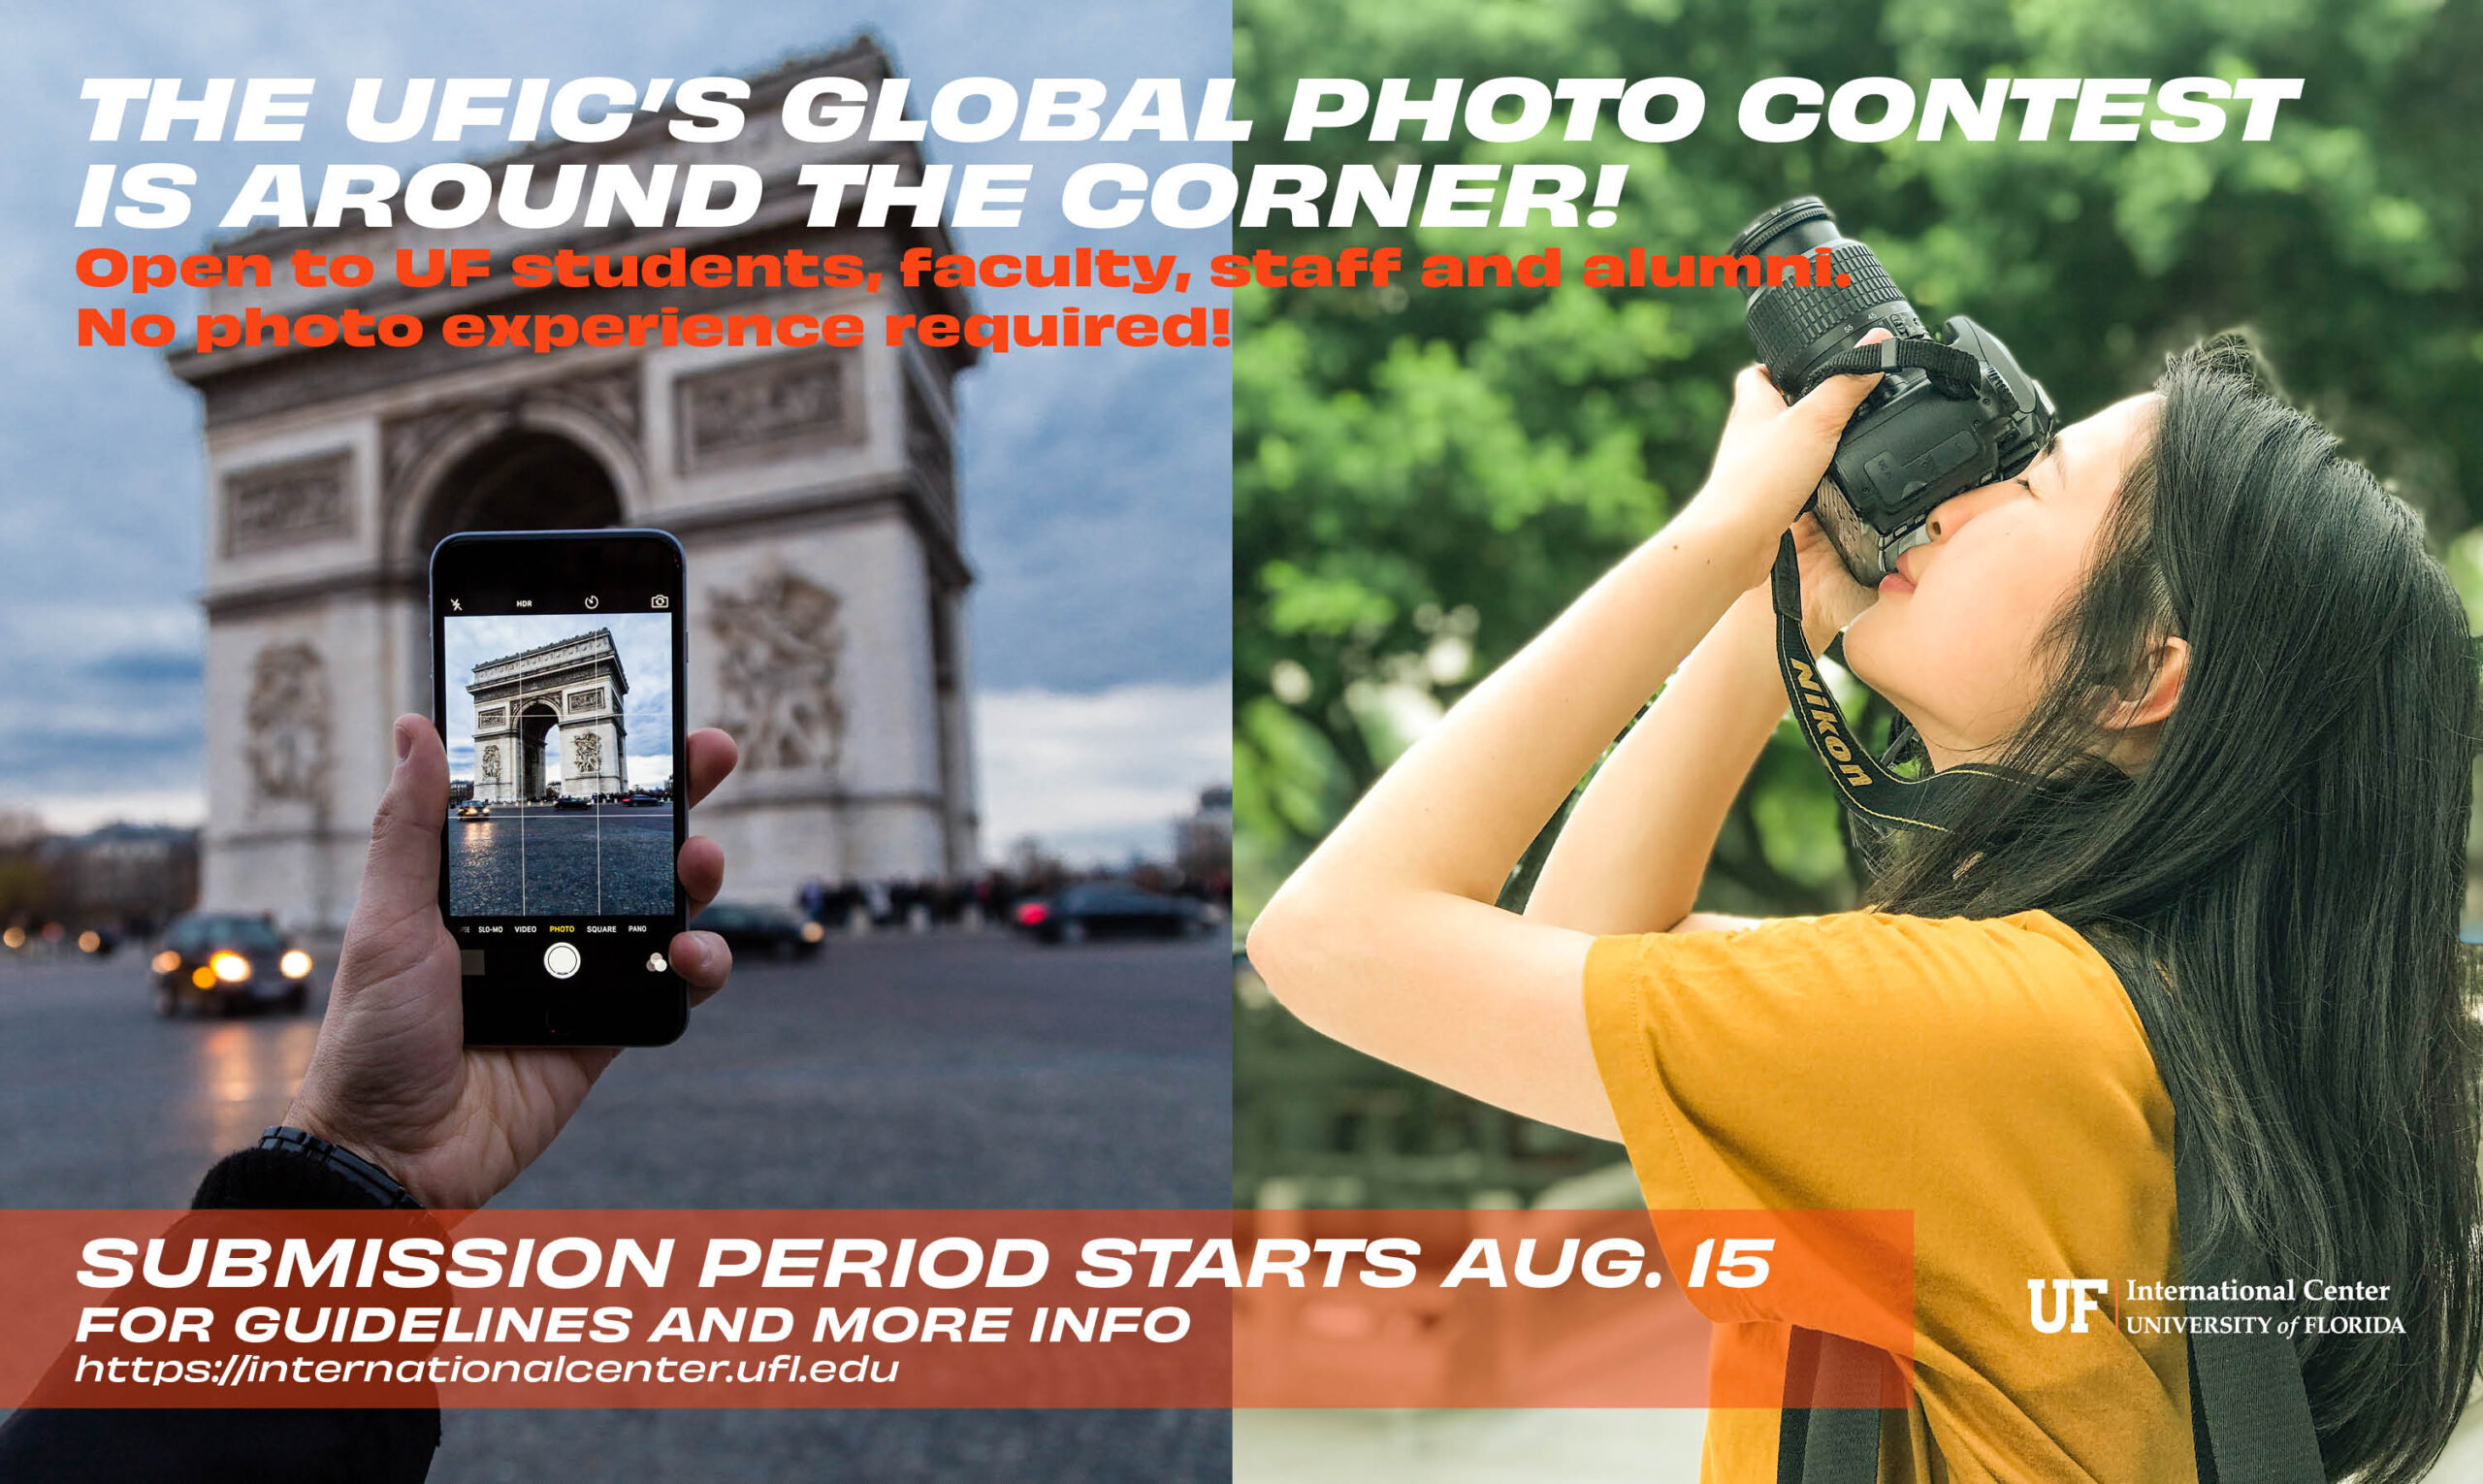 UFIC's Global Photo Contest - Submission Period Starts Aug 15